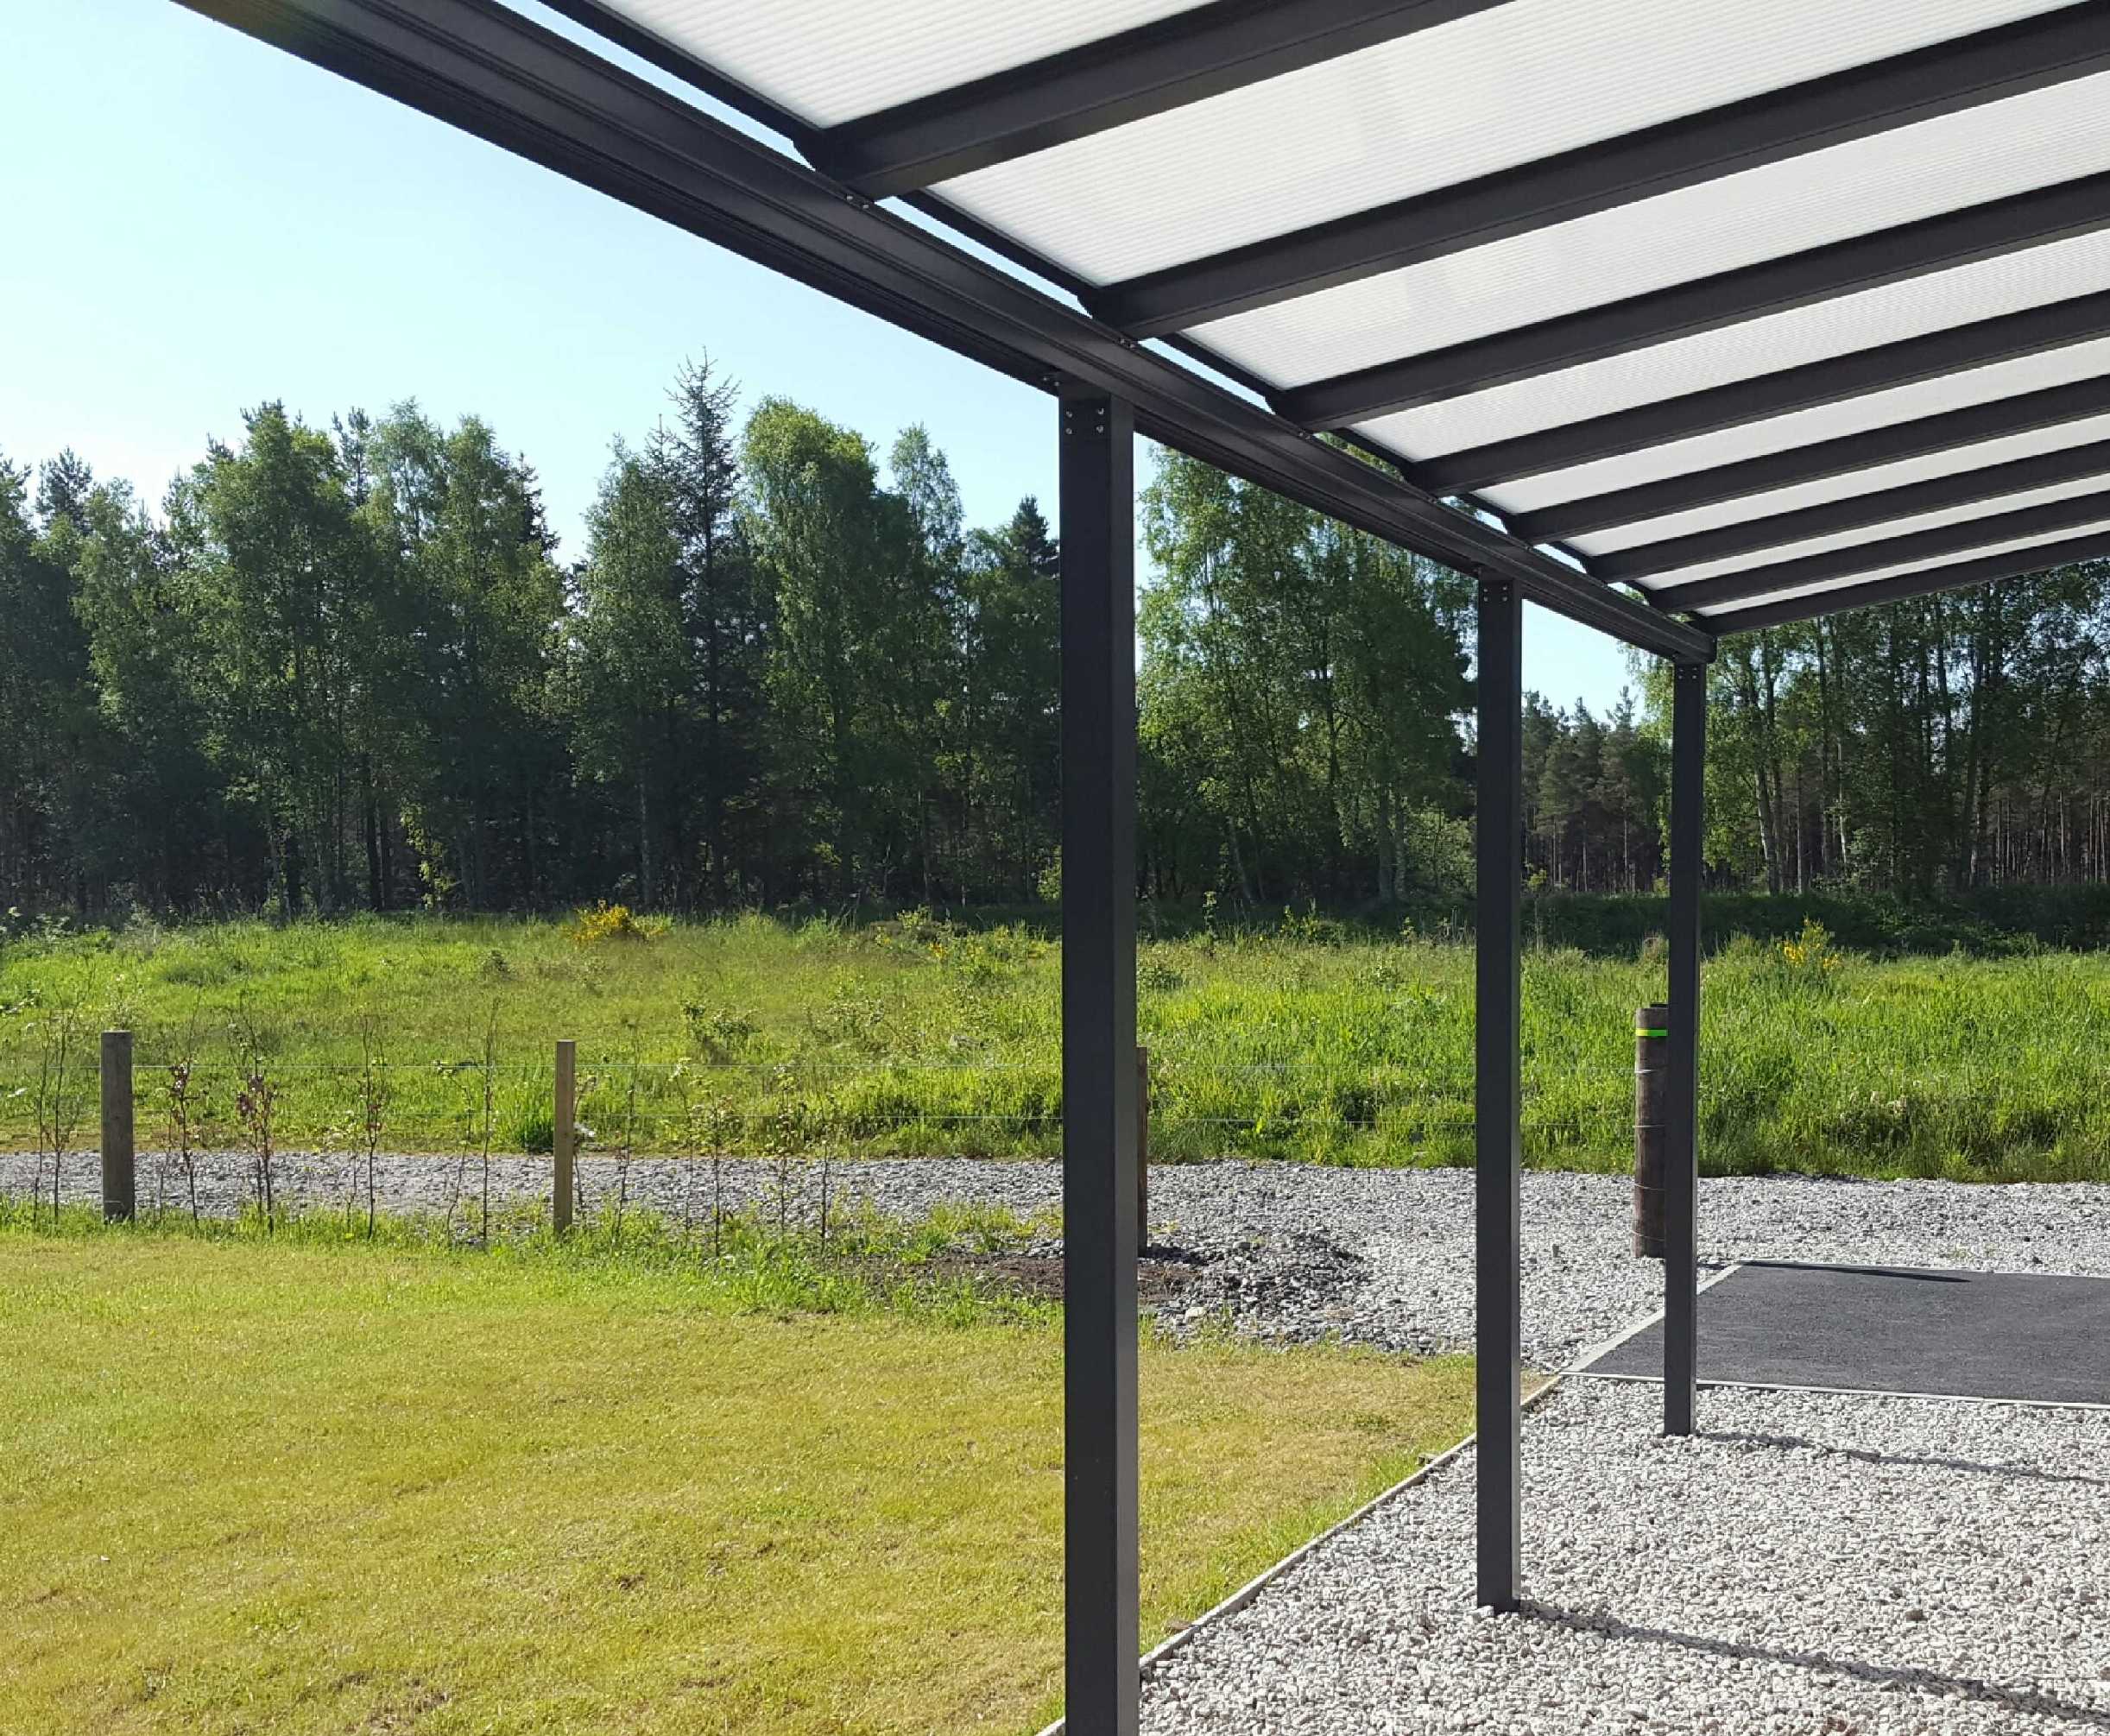 Omega Smart Lean-To Canopy, Anthracite Grey, 6mm Glass Clear Plate Polycarbonate Glazing - 7.0m (W) x 3.5m (P), (4) Supporting Posts